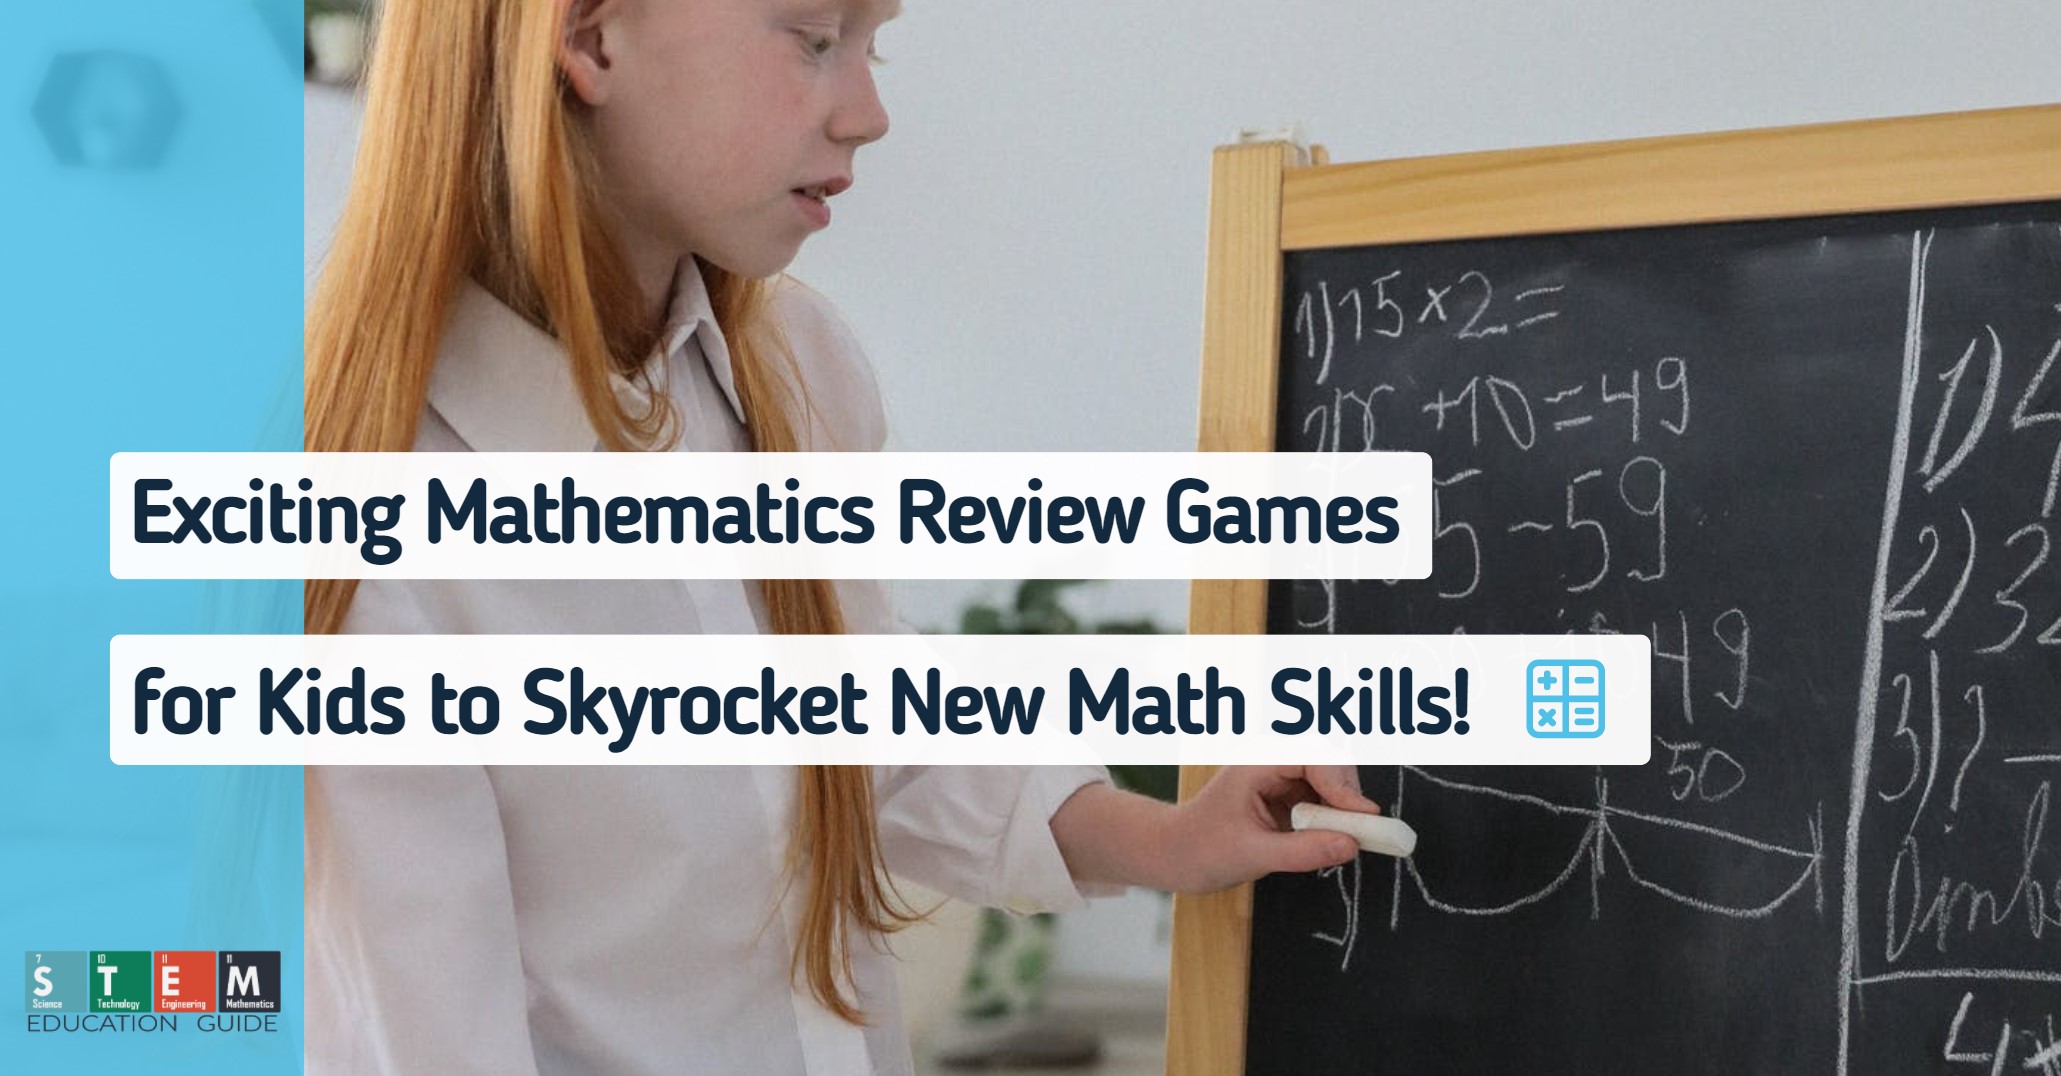 Exciting Mathematics Review Games for Kids to Skyrocket New Math Skills On-The-Go